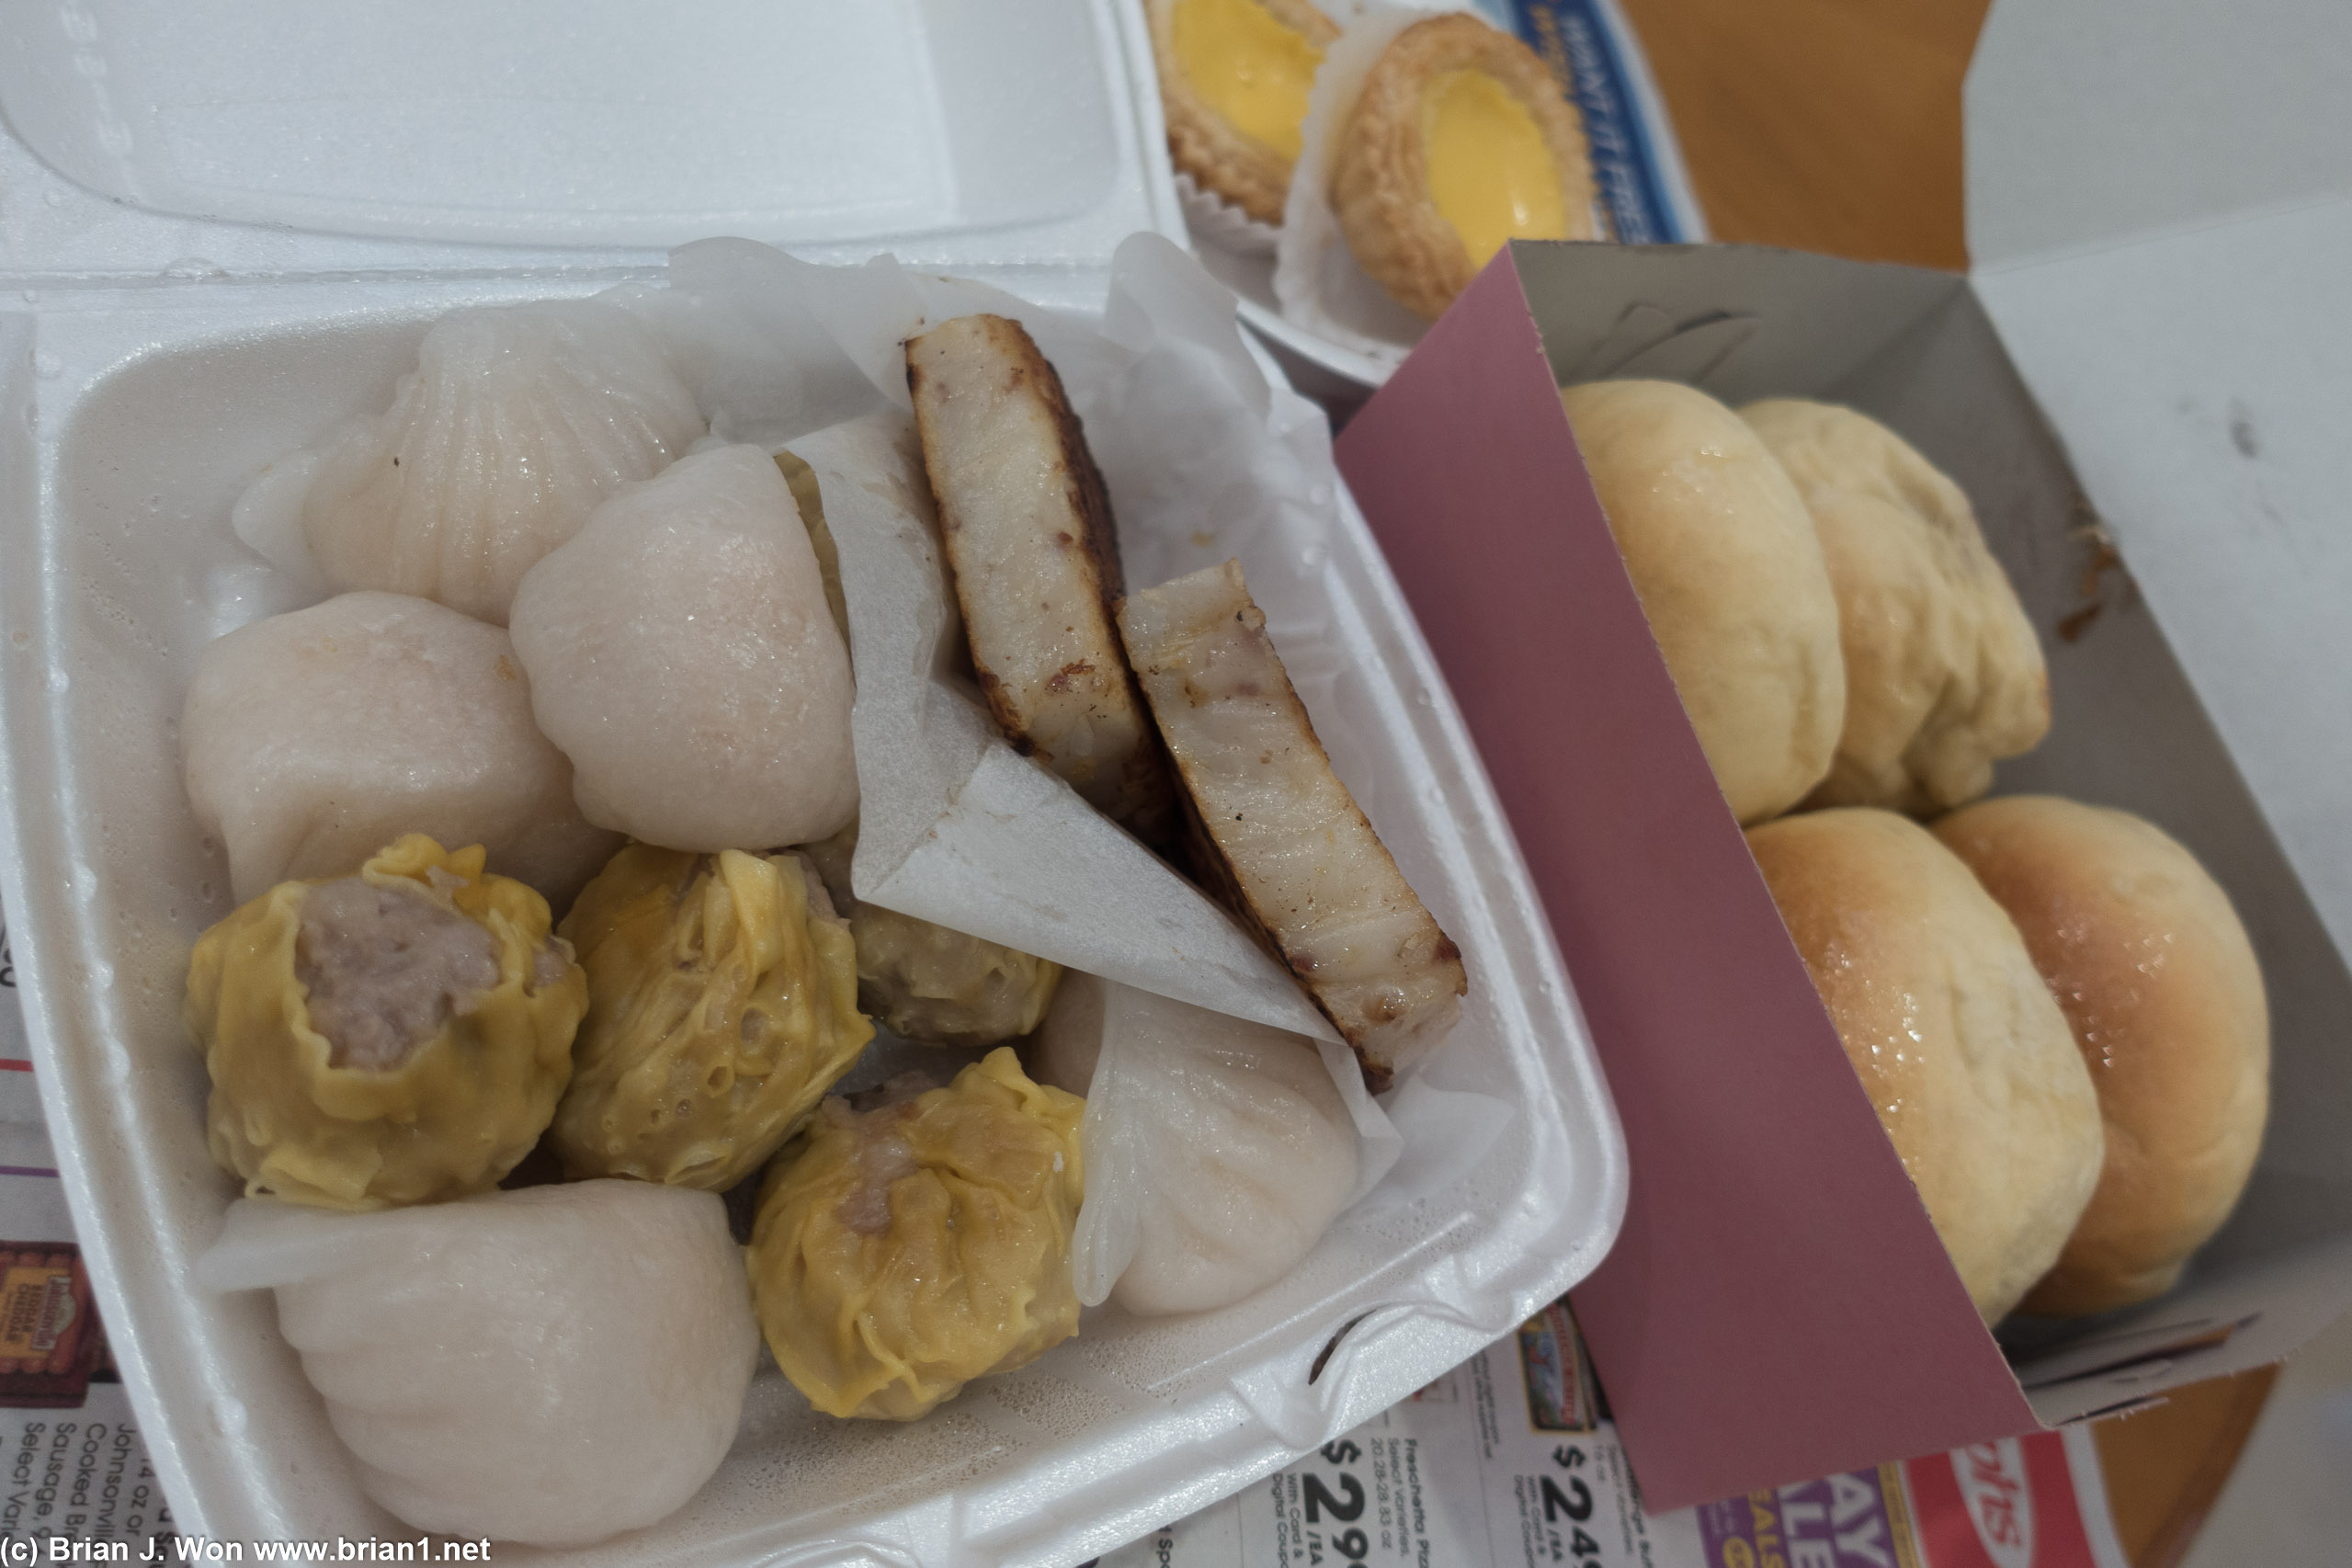 Frozen the baos, ate the rest over a few meals.